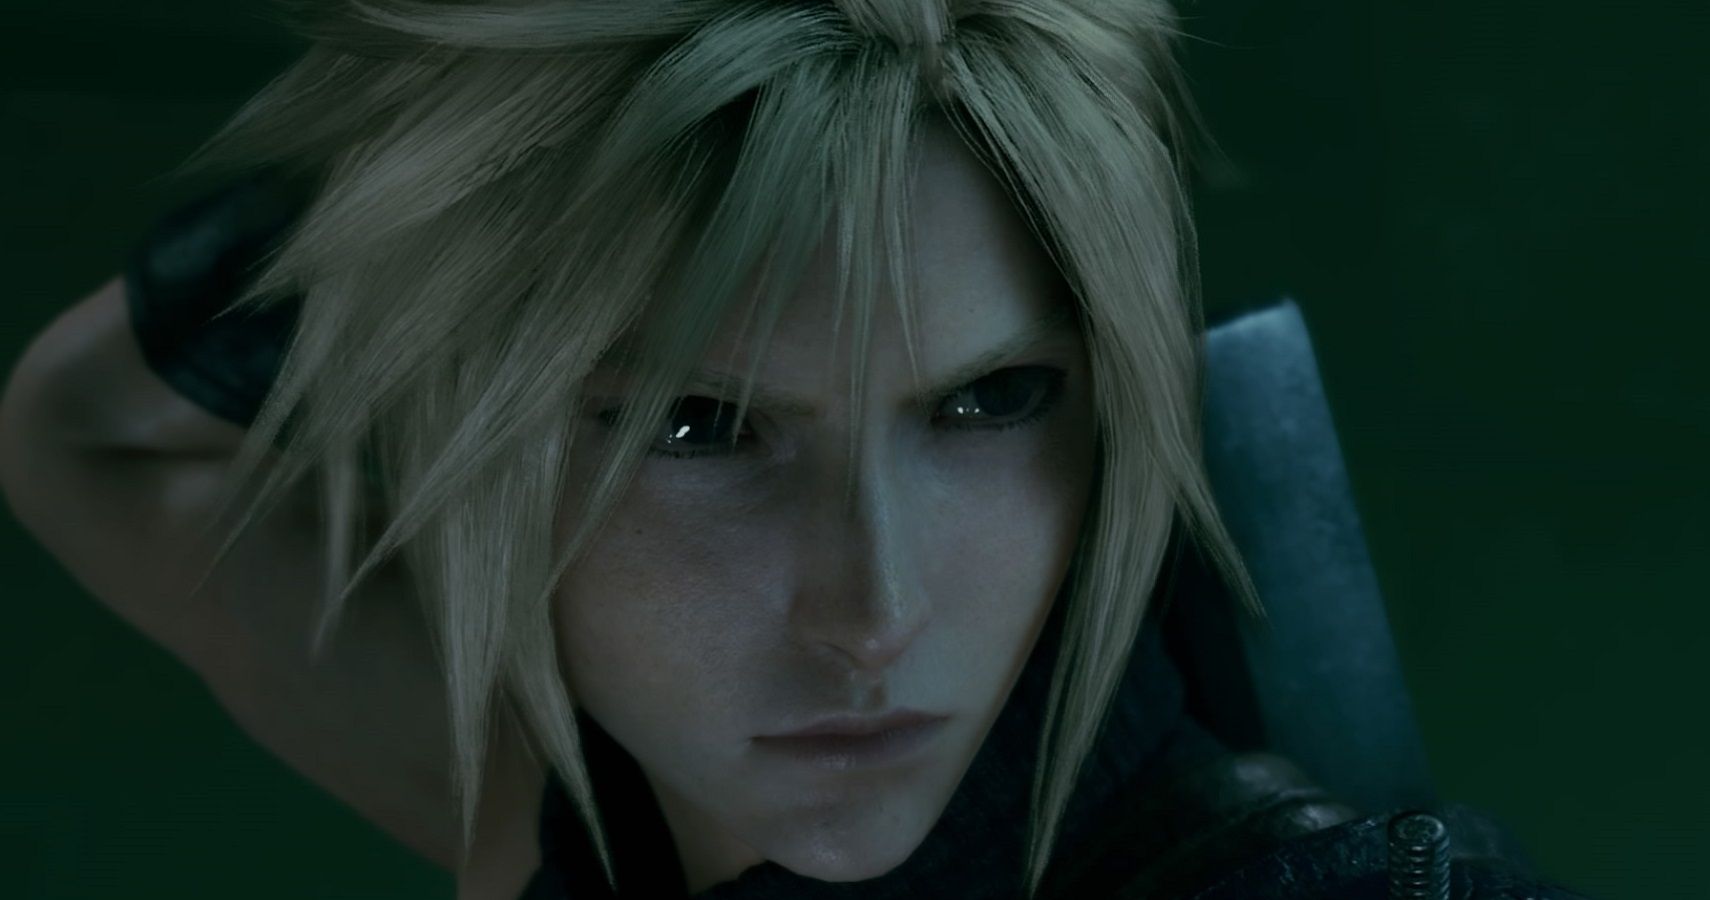 Final Fantasy 7 Remake Character Renders Show Stunning Detail